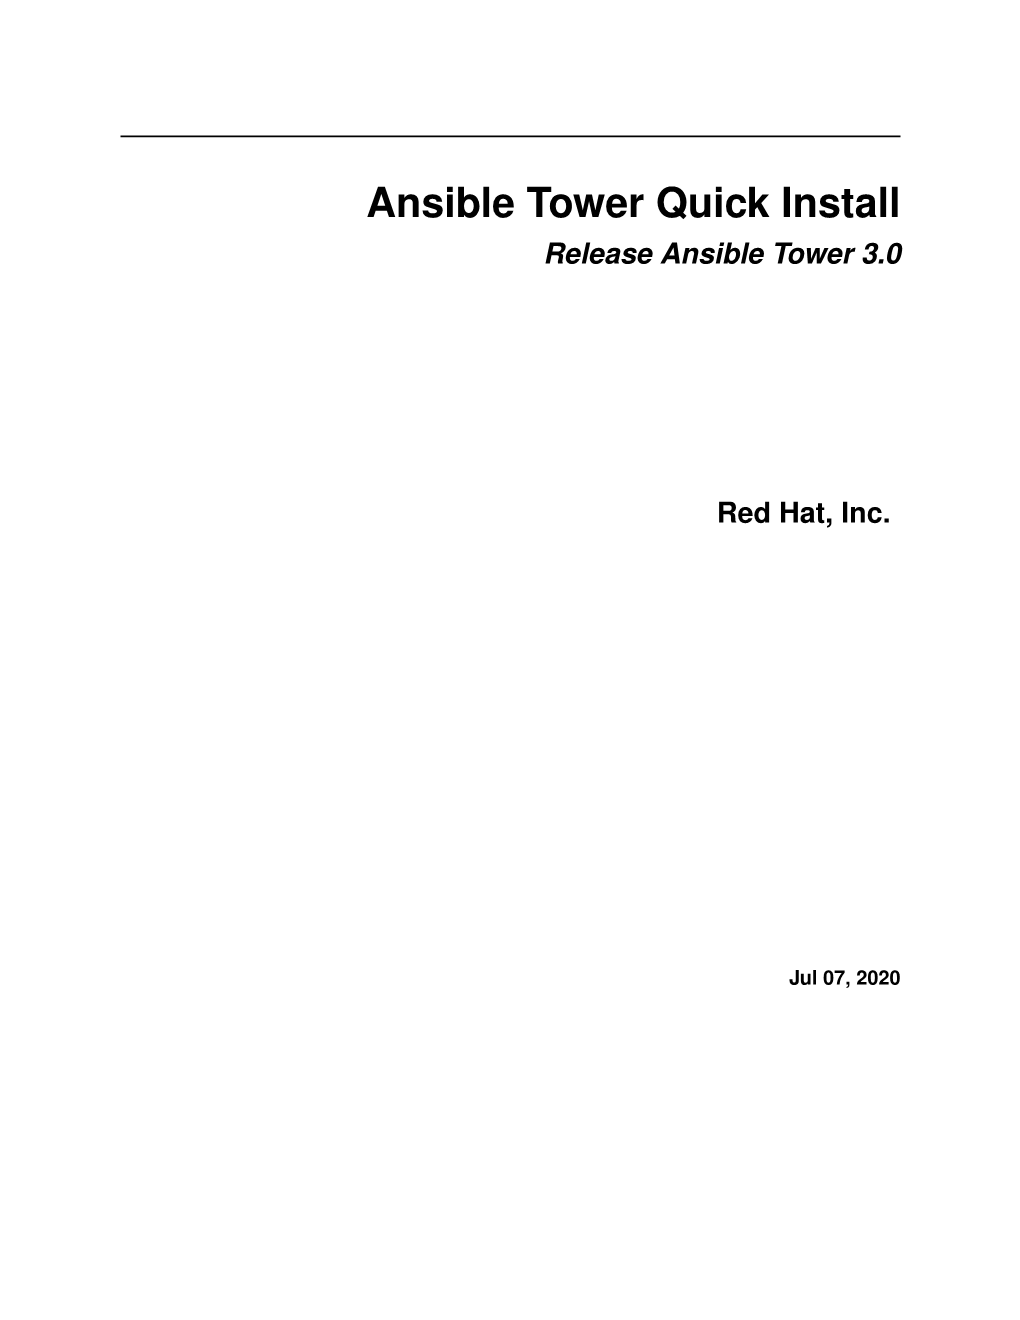 Ansible Tower Quick Install Release Ansible Tower 3.0